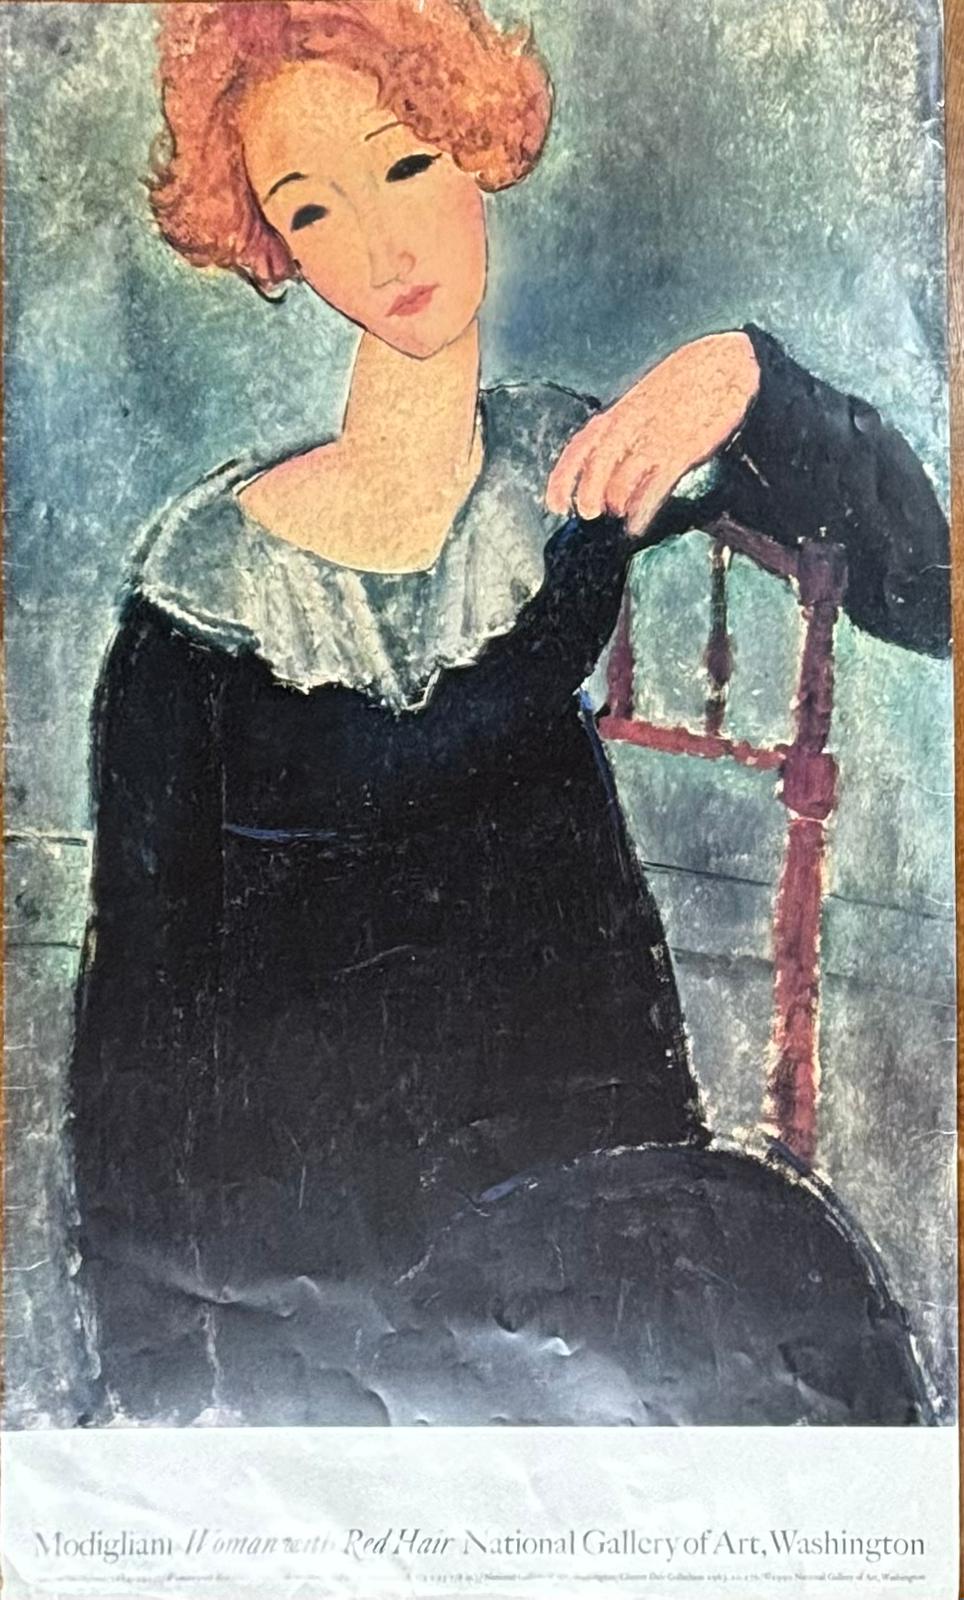 AMEDEO MODIGLIANI (1884-1920) - WOMAN WITH RED HAIR PRINT